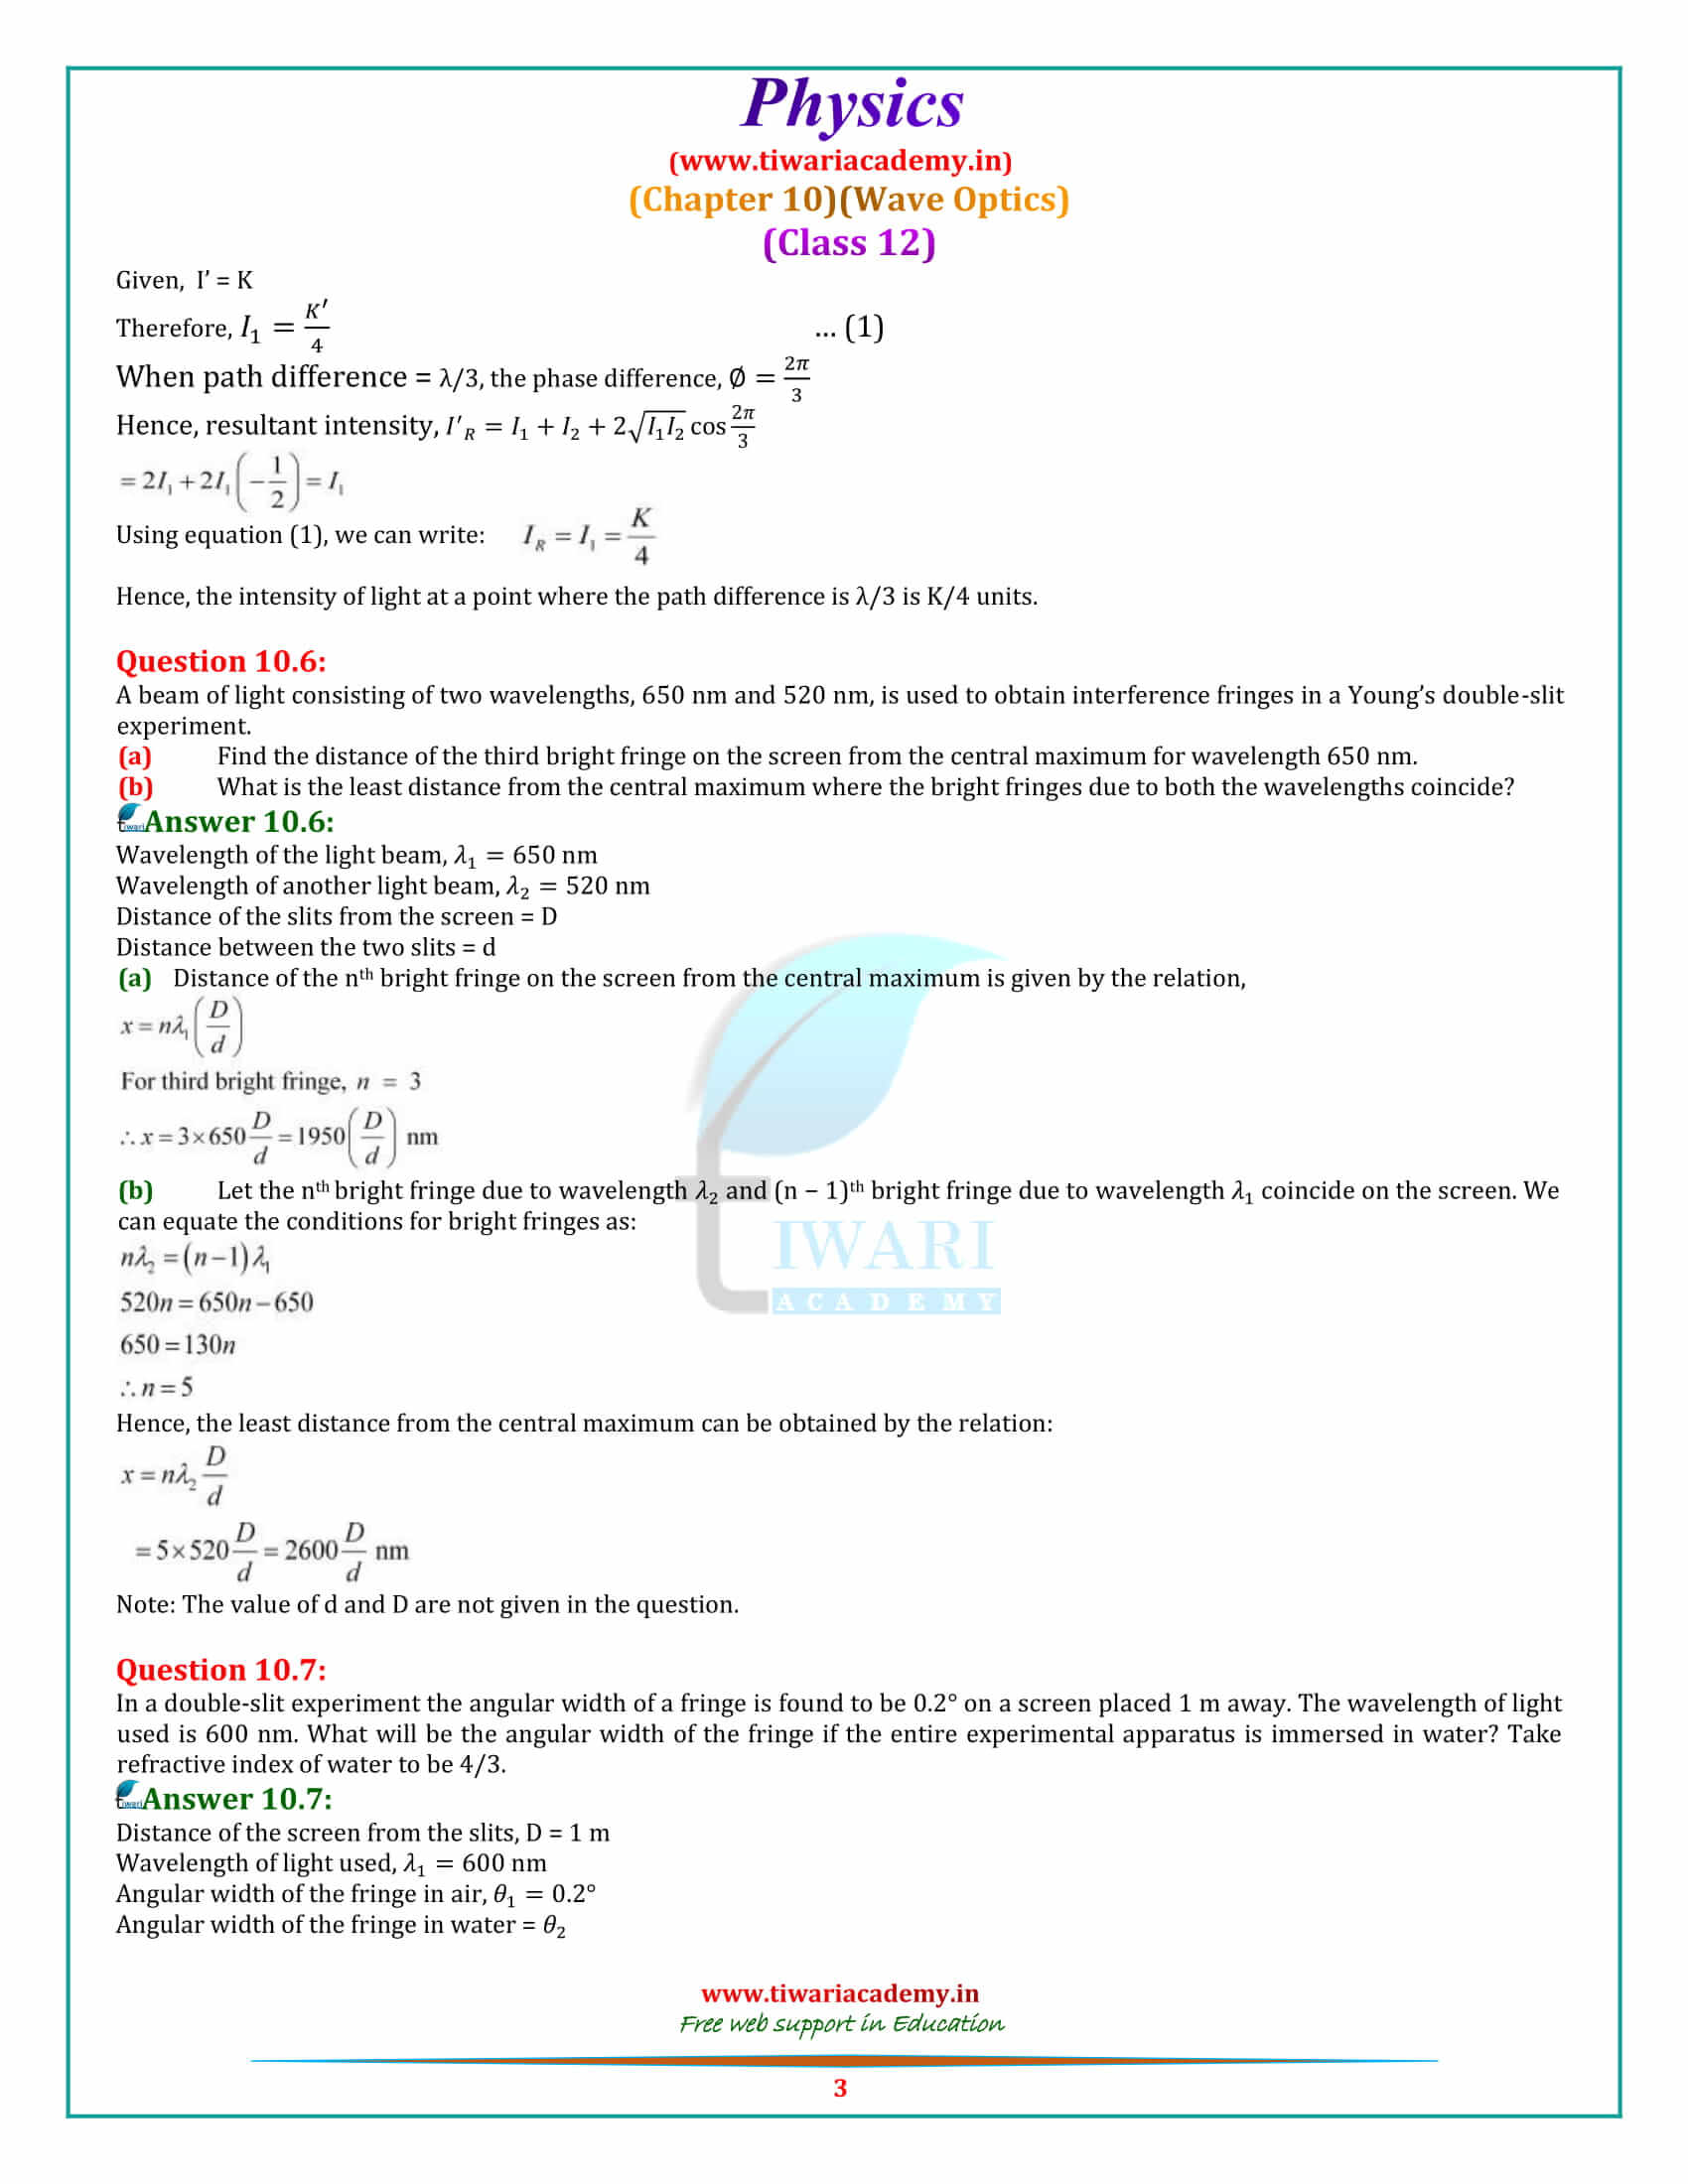 NCERT Solutions for Class 12 Physics Chapter 10 Wave Optics free download